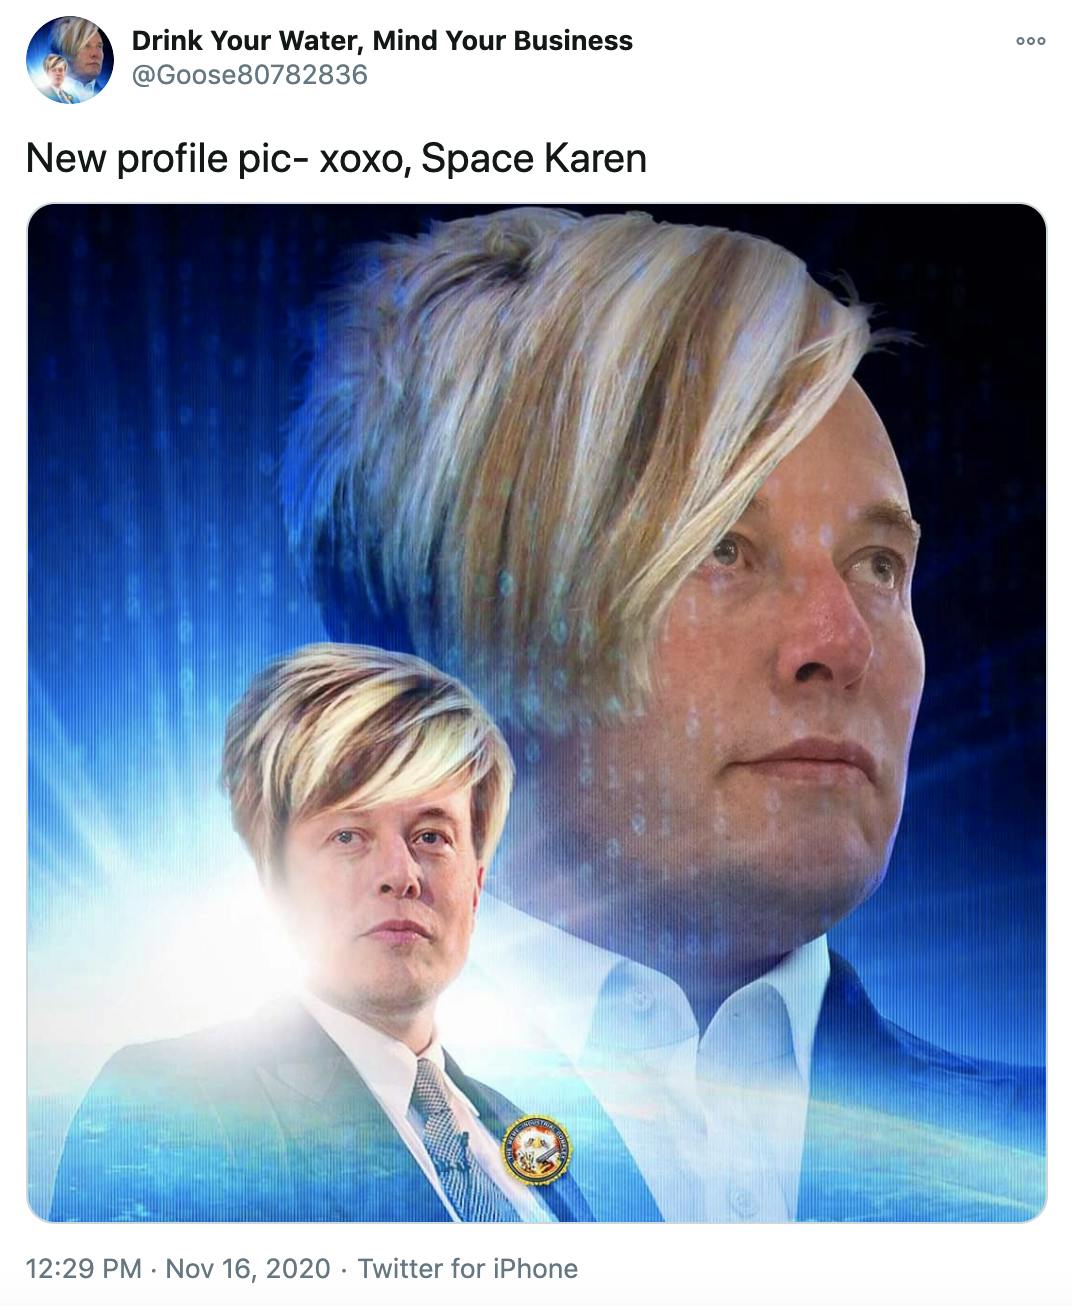 'New profile pic- xoxo, Space Karen' image of Elon Musk against a starburst with the Karen haircut, looking off to the side. A smaller version of the same image facing the other way in front.